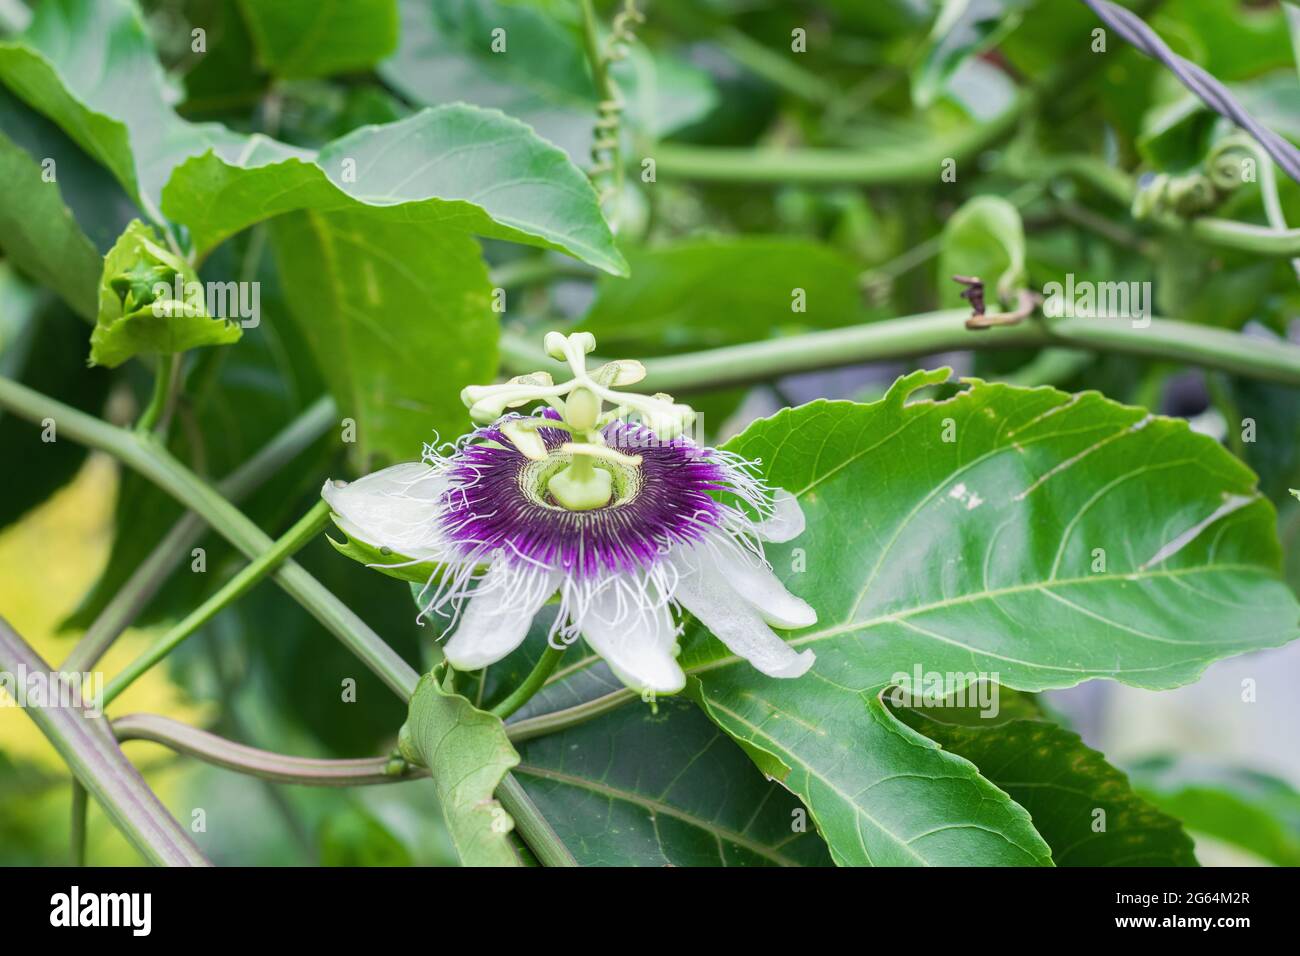 Passiflora edulis, pollinated passion fruit flower, in cultivation surrounded by green leaves Stock Photo